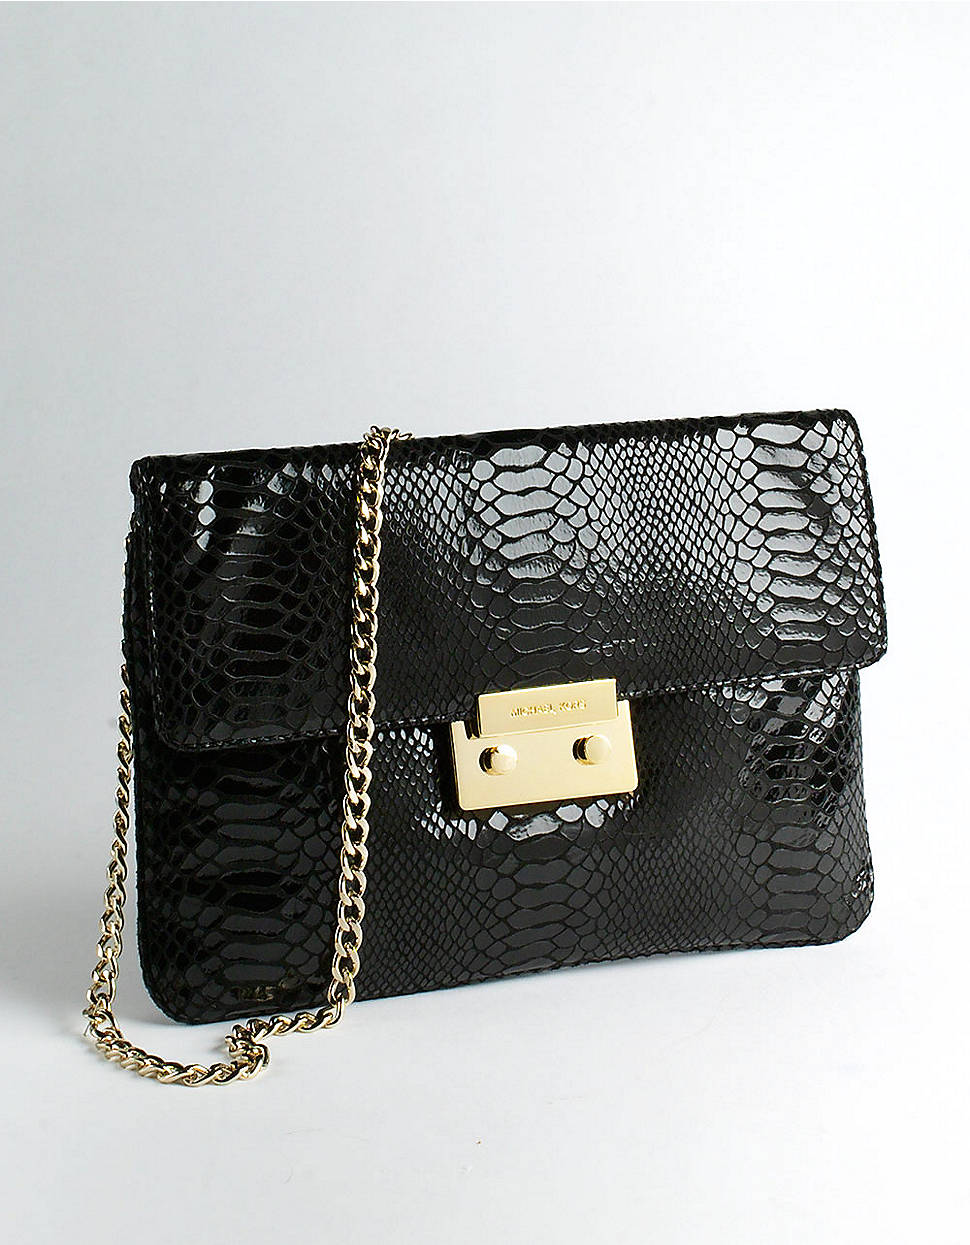 Michael Michael Kors Sloan Python Embossed Leather Clutch in Black | Lyst